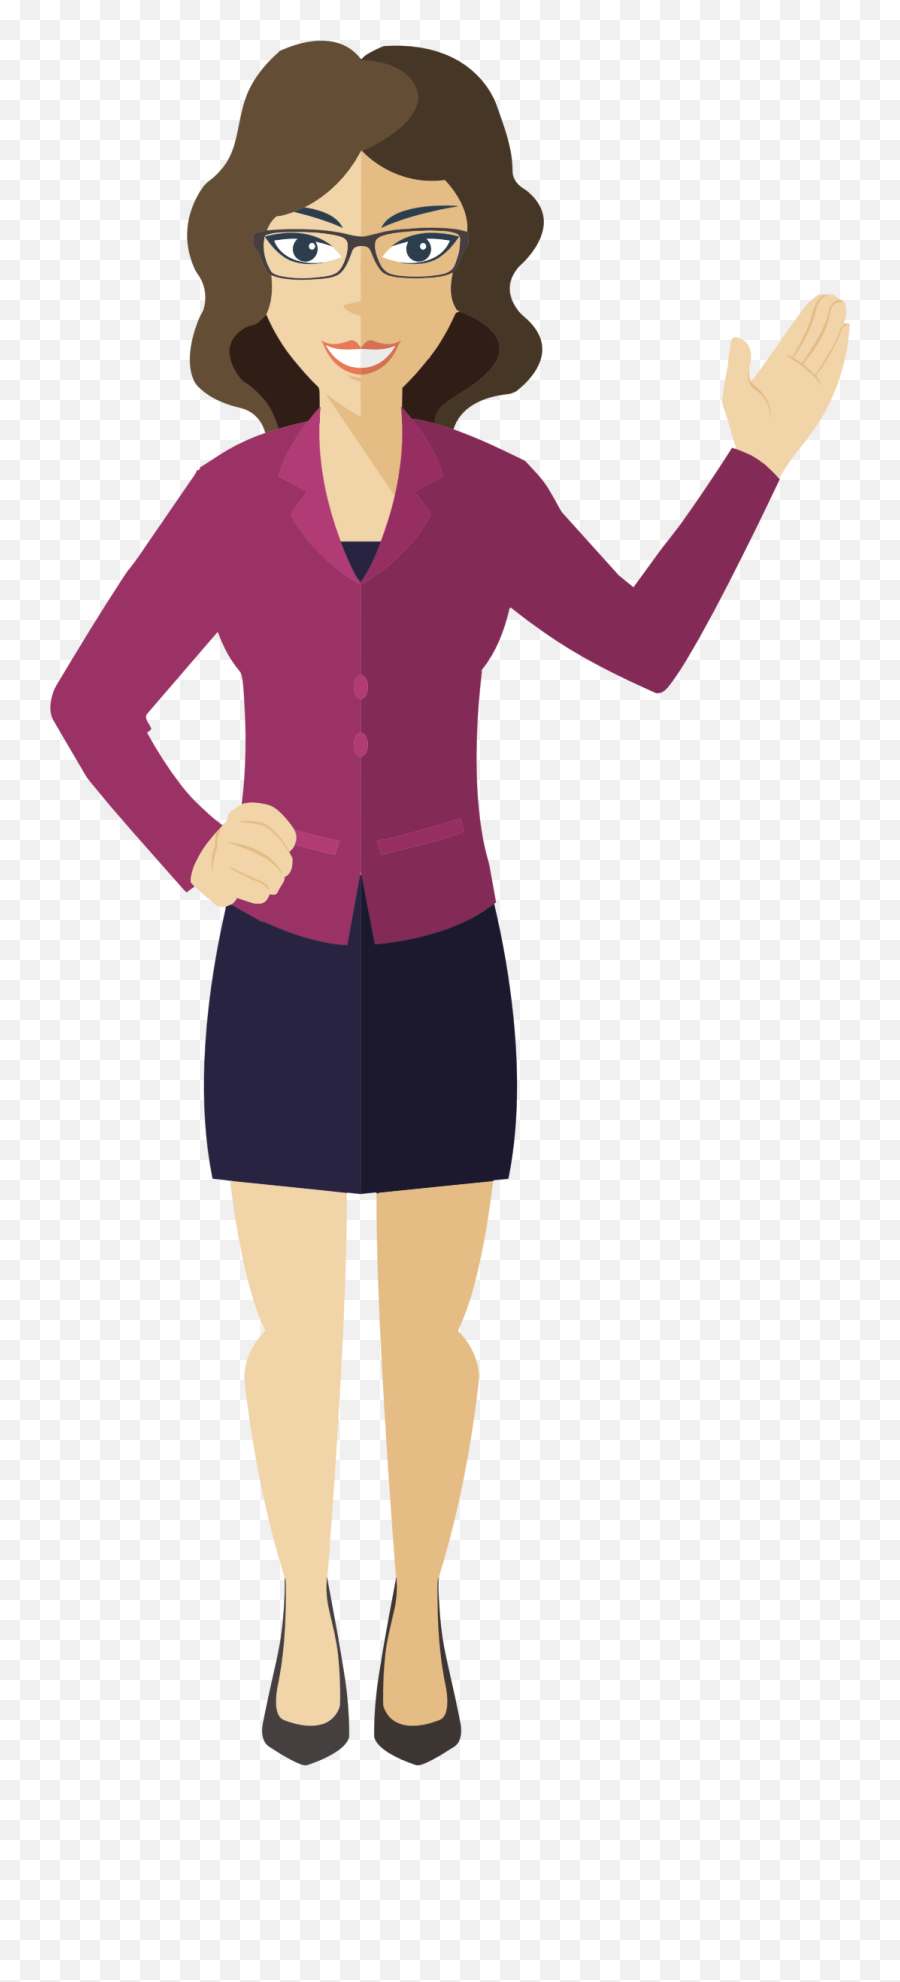 Business Woman Png Image - Business Person Clip Art,Cartoon Woman Png